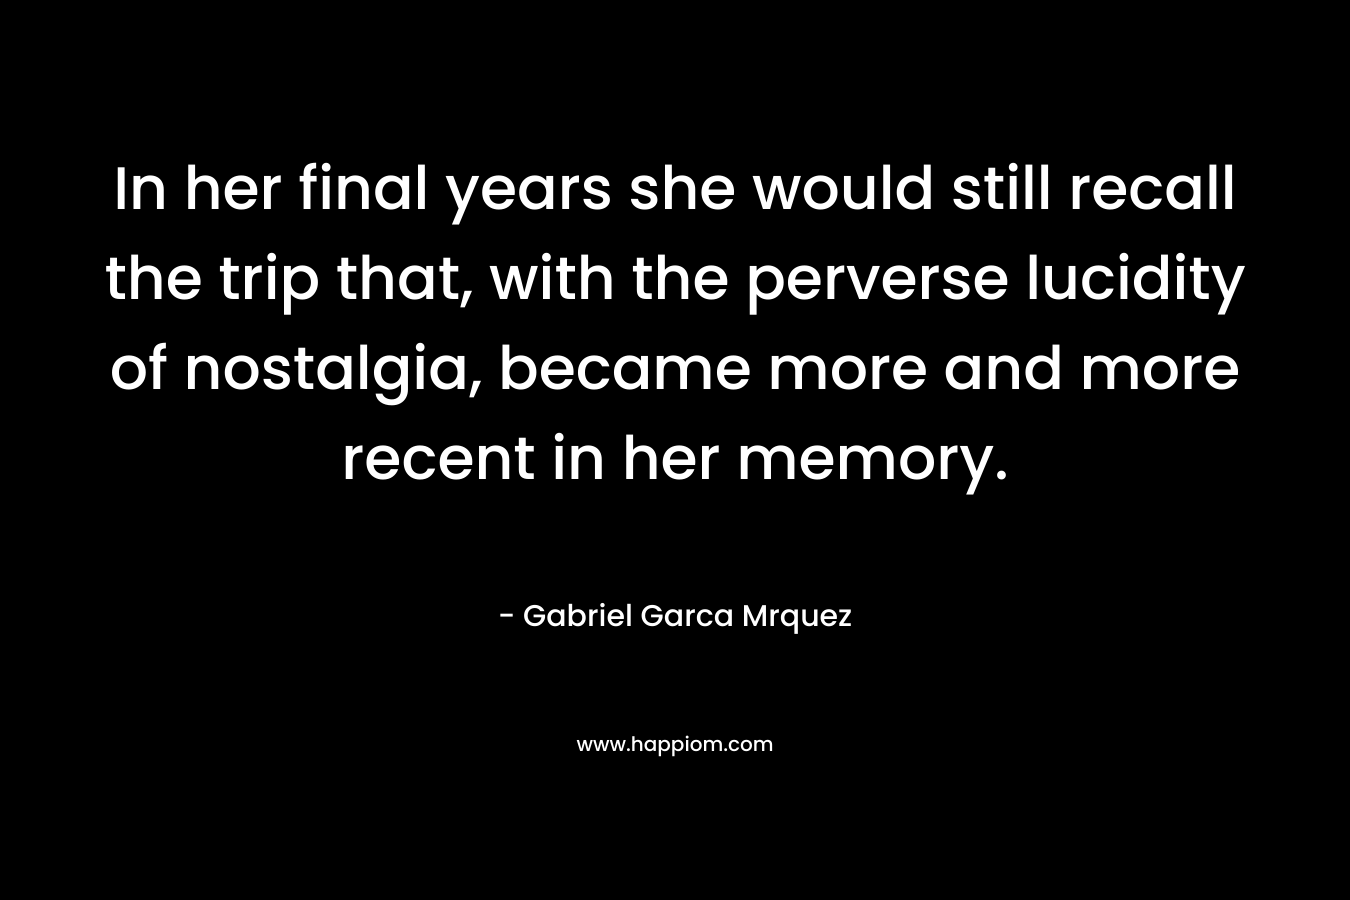 In her final years she would still recall the trip that, with the perverse lucidity of nostalgia, became more and more recent in her memory.